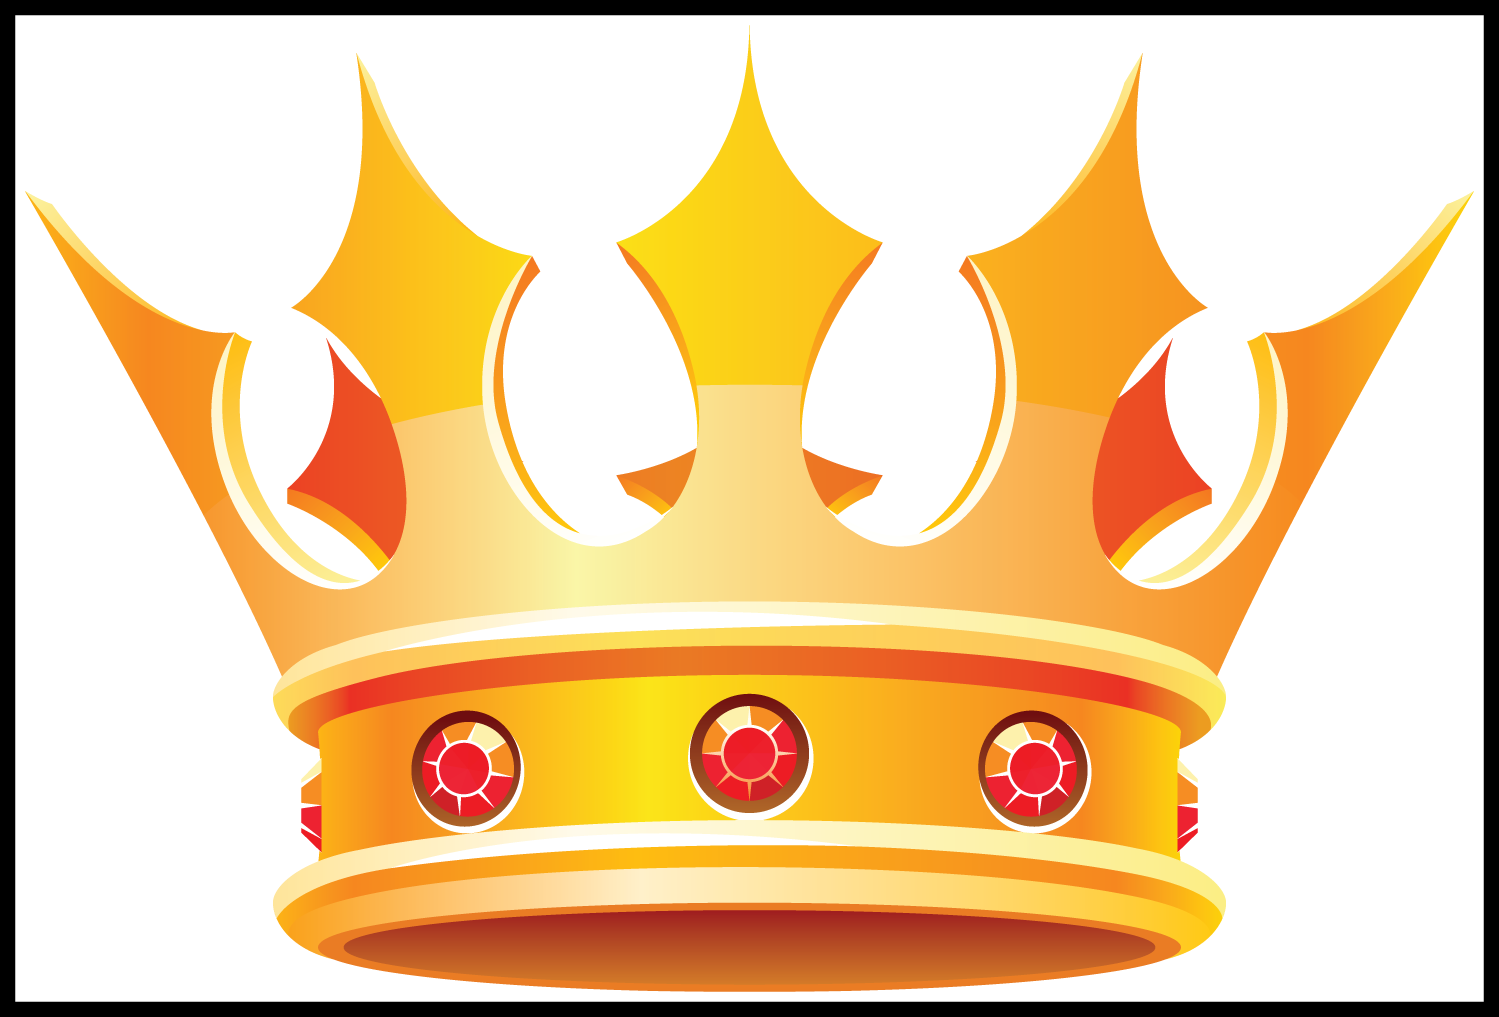 Gold Crowns Gold Crowns Clipart Awesome Crown Clip - King And Queen Crowns Clipart (1499x1017)